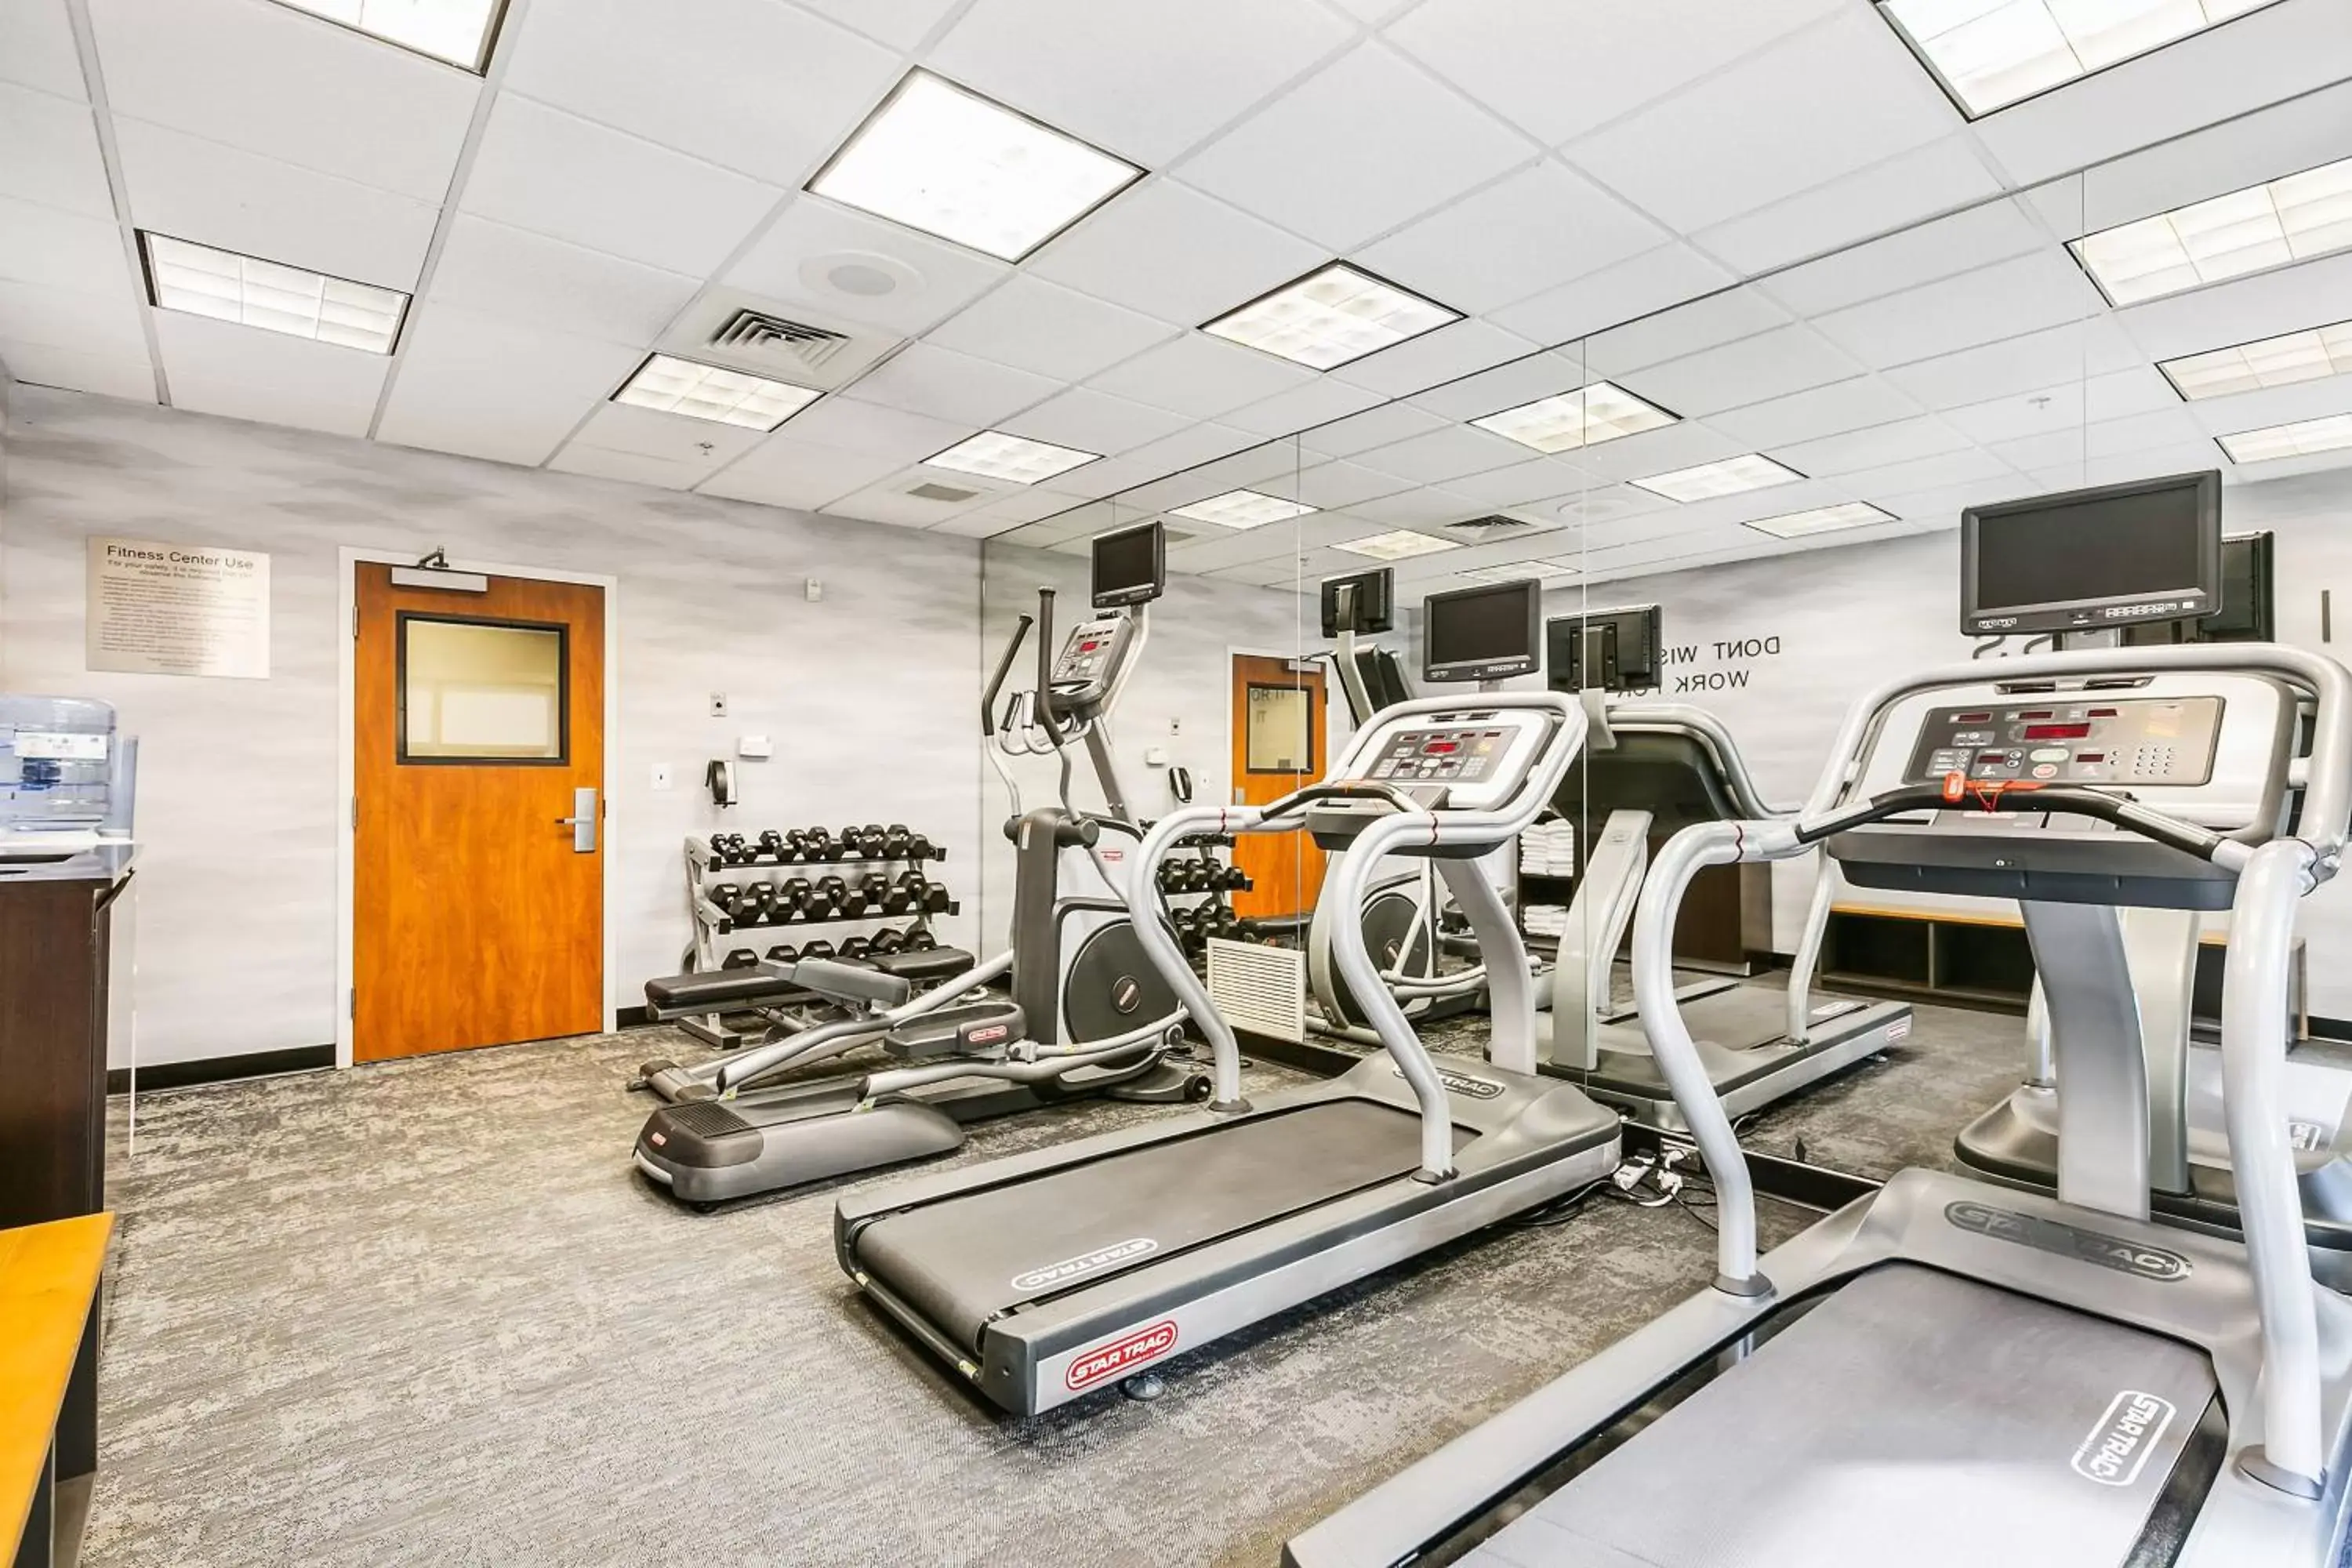 Fitness centre/facilities, Fitness Center/Facilities in Fairfield Inn & Suites Bend Downtown